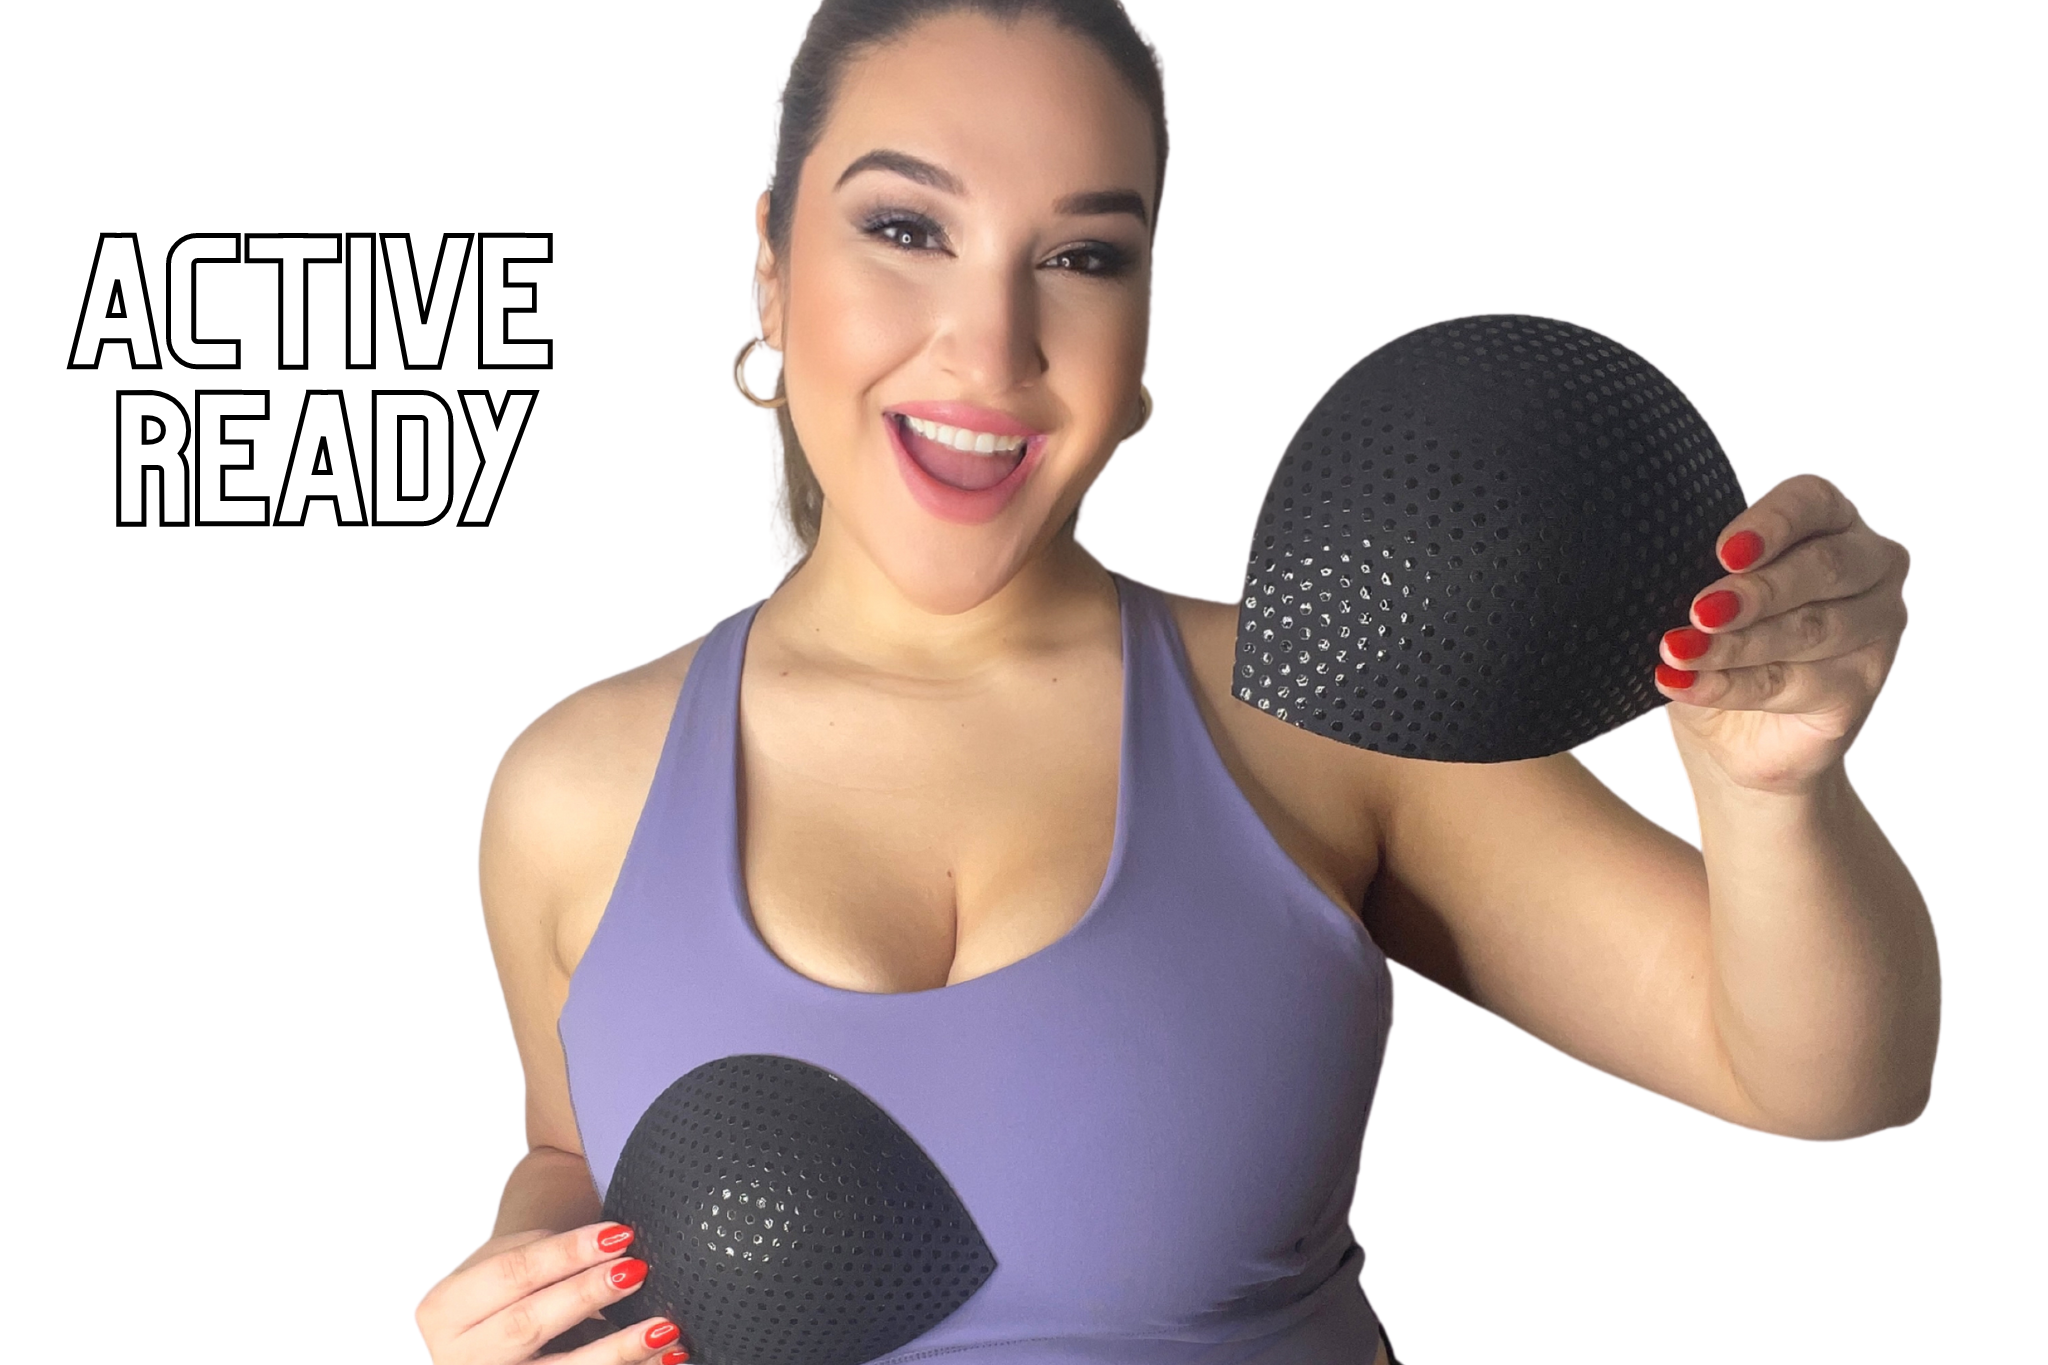 6cm Latex Braless Breast Pads For Small Chest And Sports Bra Special  Enlarged Inner Pad With Thickened Bra Insert 230701 From Lian07, $11.83